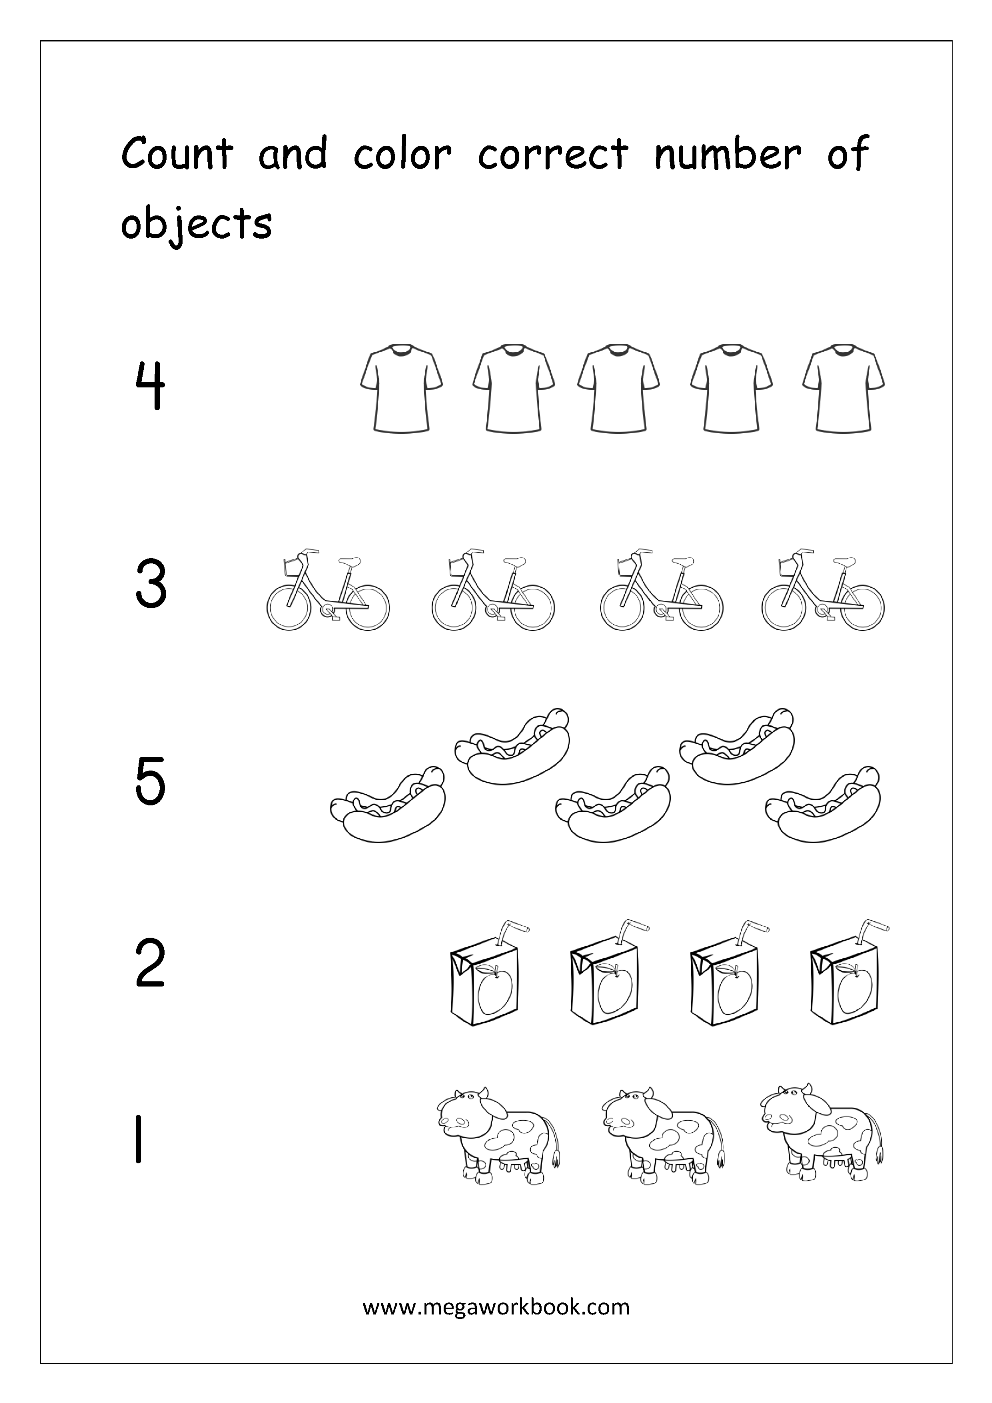 number-counting-worksheets-math-counting-worksheets-free-counting-worksheets-for